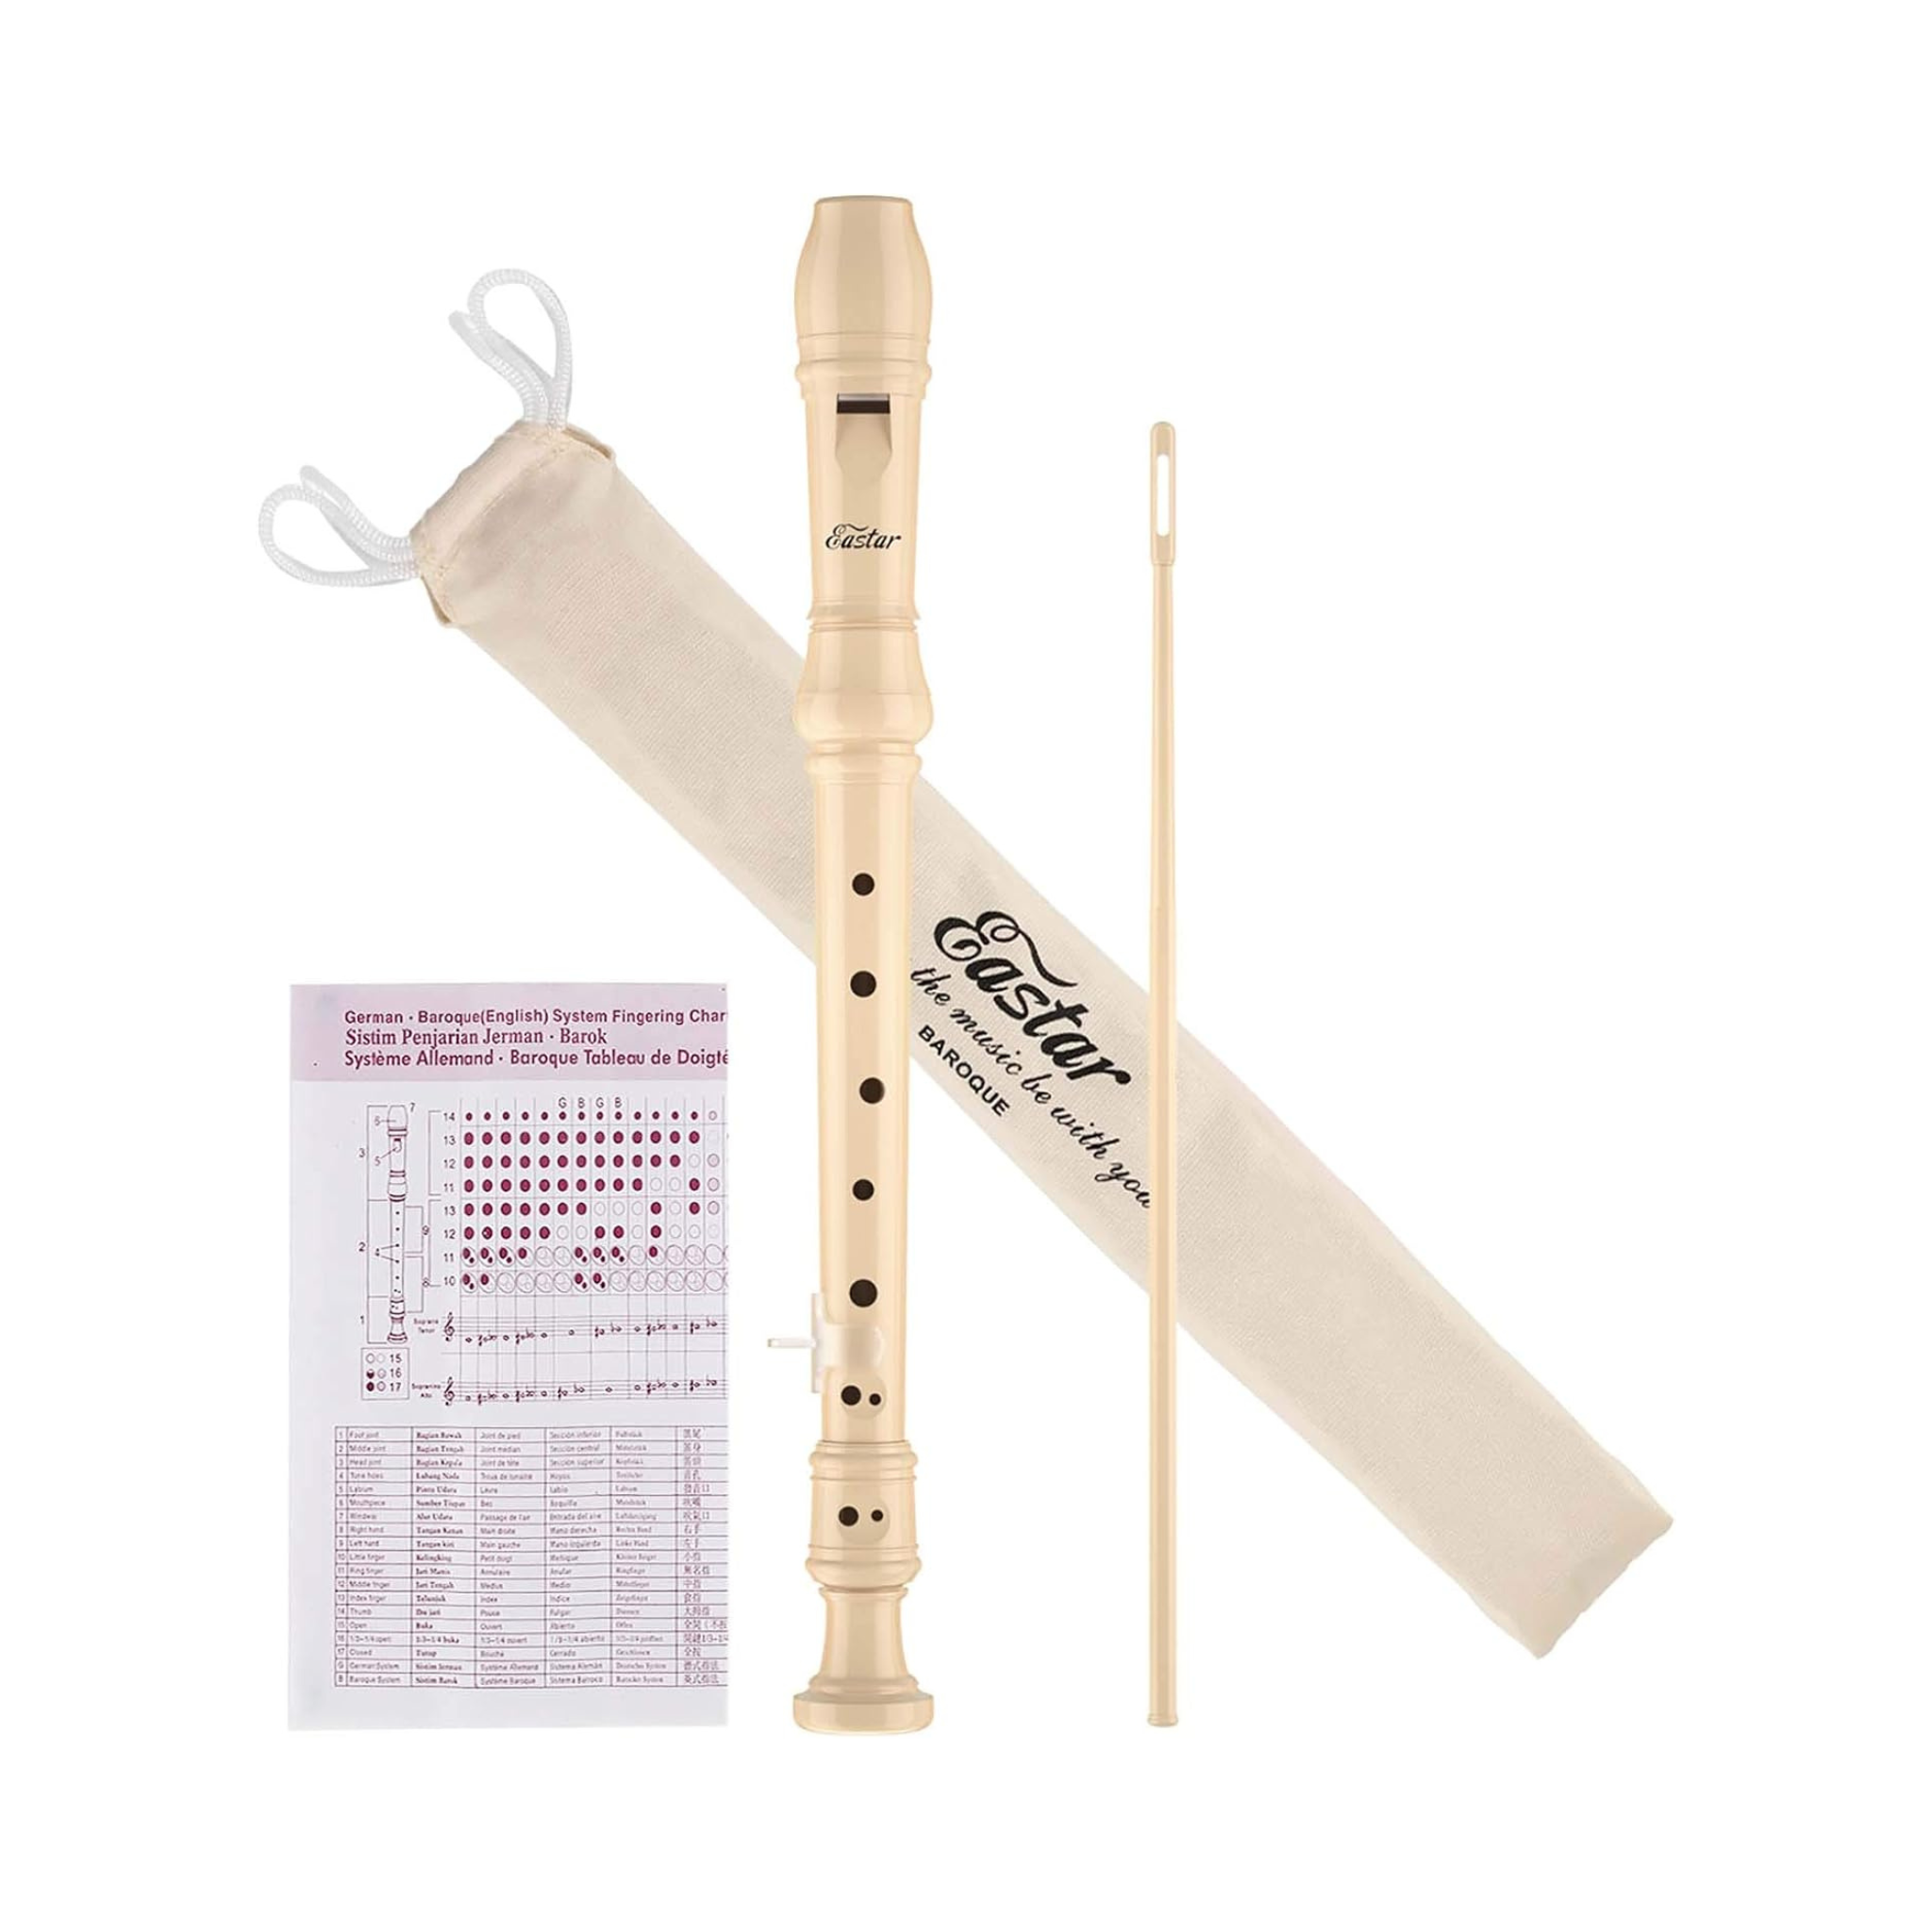 3-Piece Eastar Soprano Recorder Instrument with Cleaning Kit